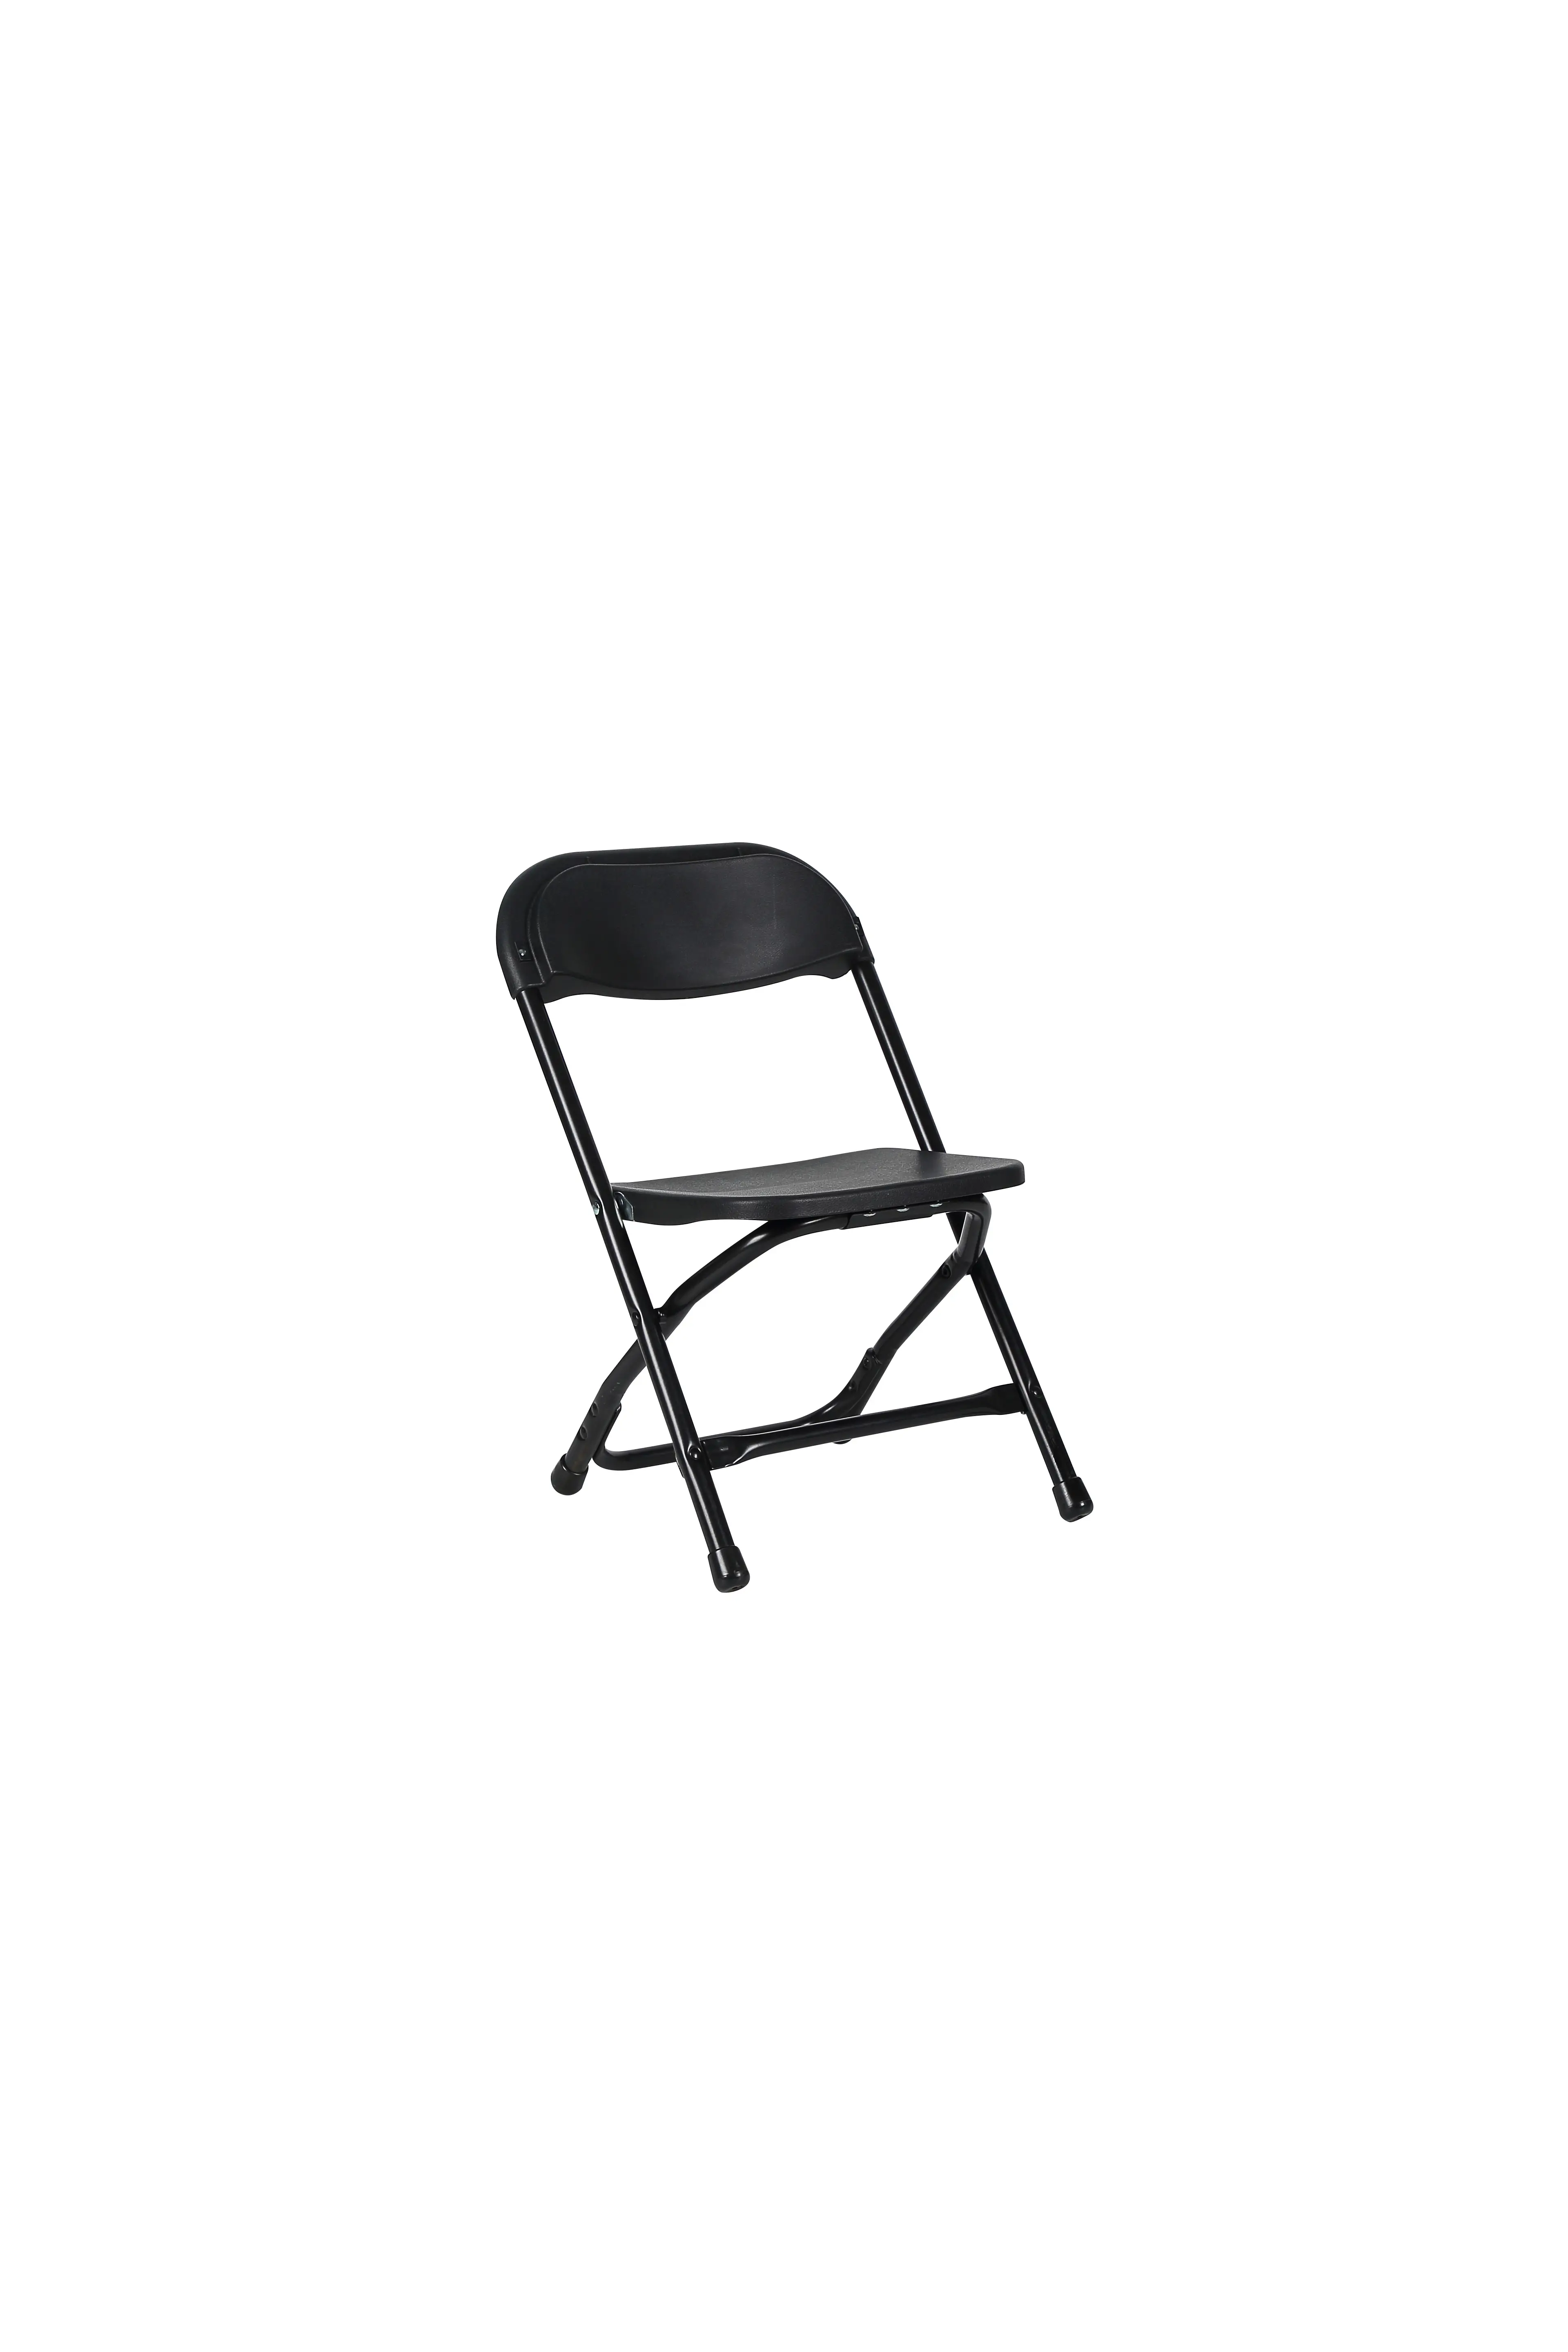 dining chairs home furniture child plastic folding chair